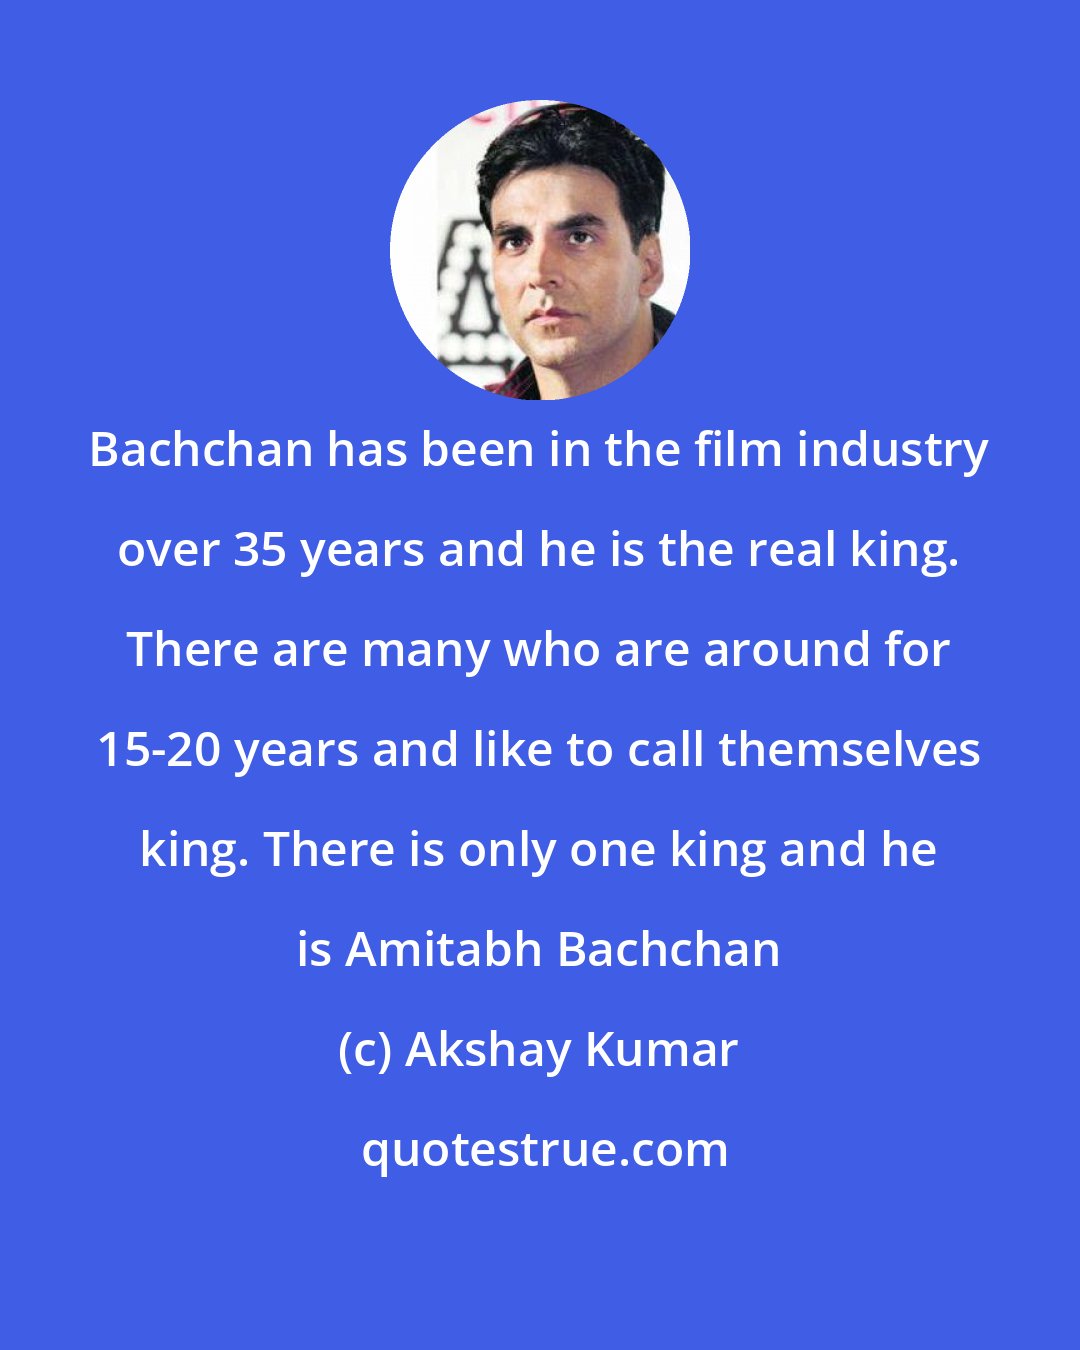 Akshay Kumar: Bachchan has been in the film industry over 35 years and he is the real king. There are many who are around for 15-20 years and like to call themselves king. There is only one king and he is Amitabh Bachchan